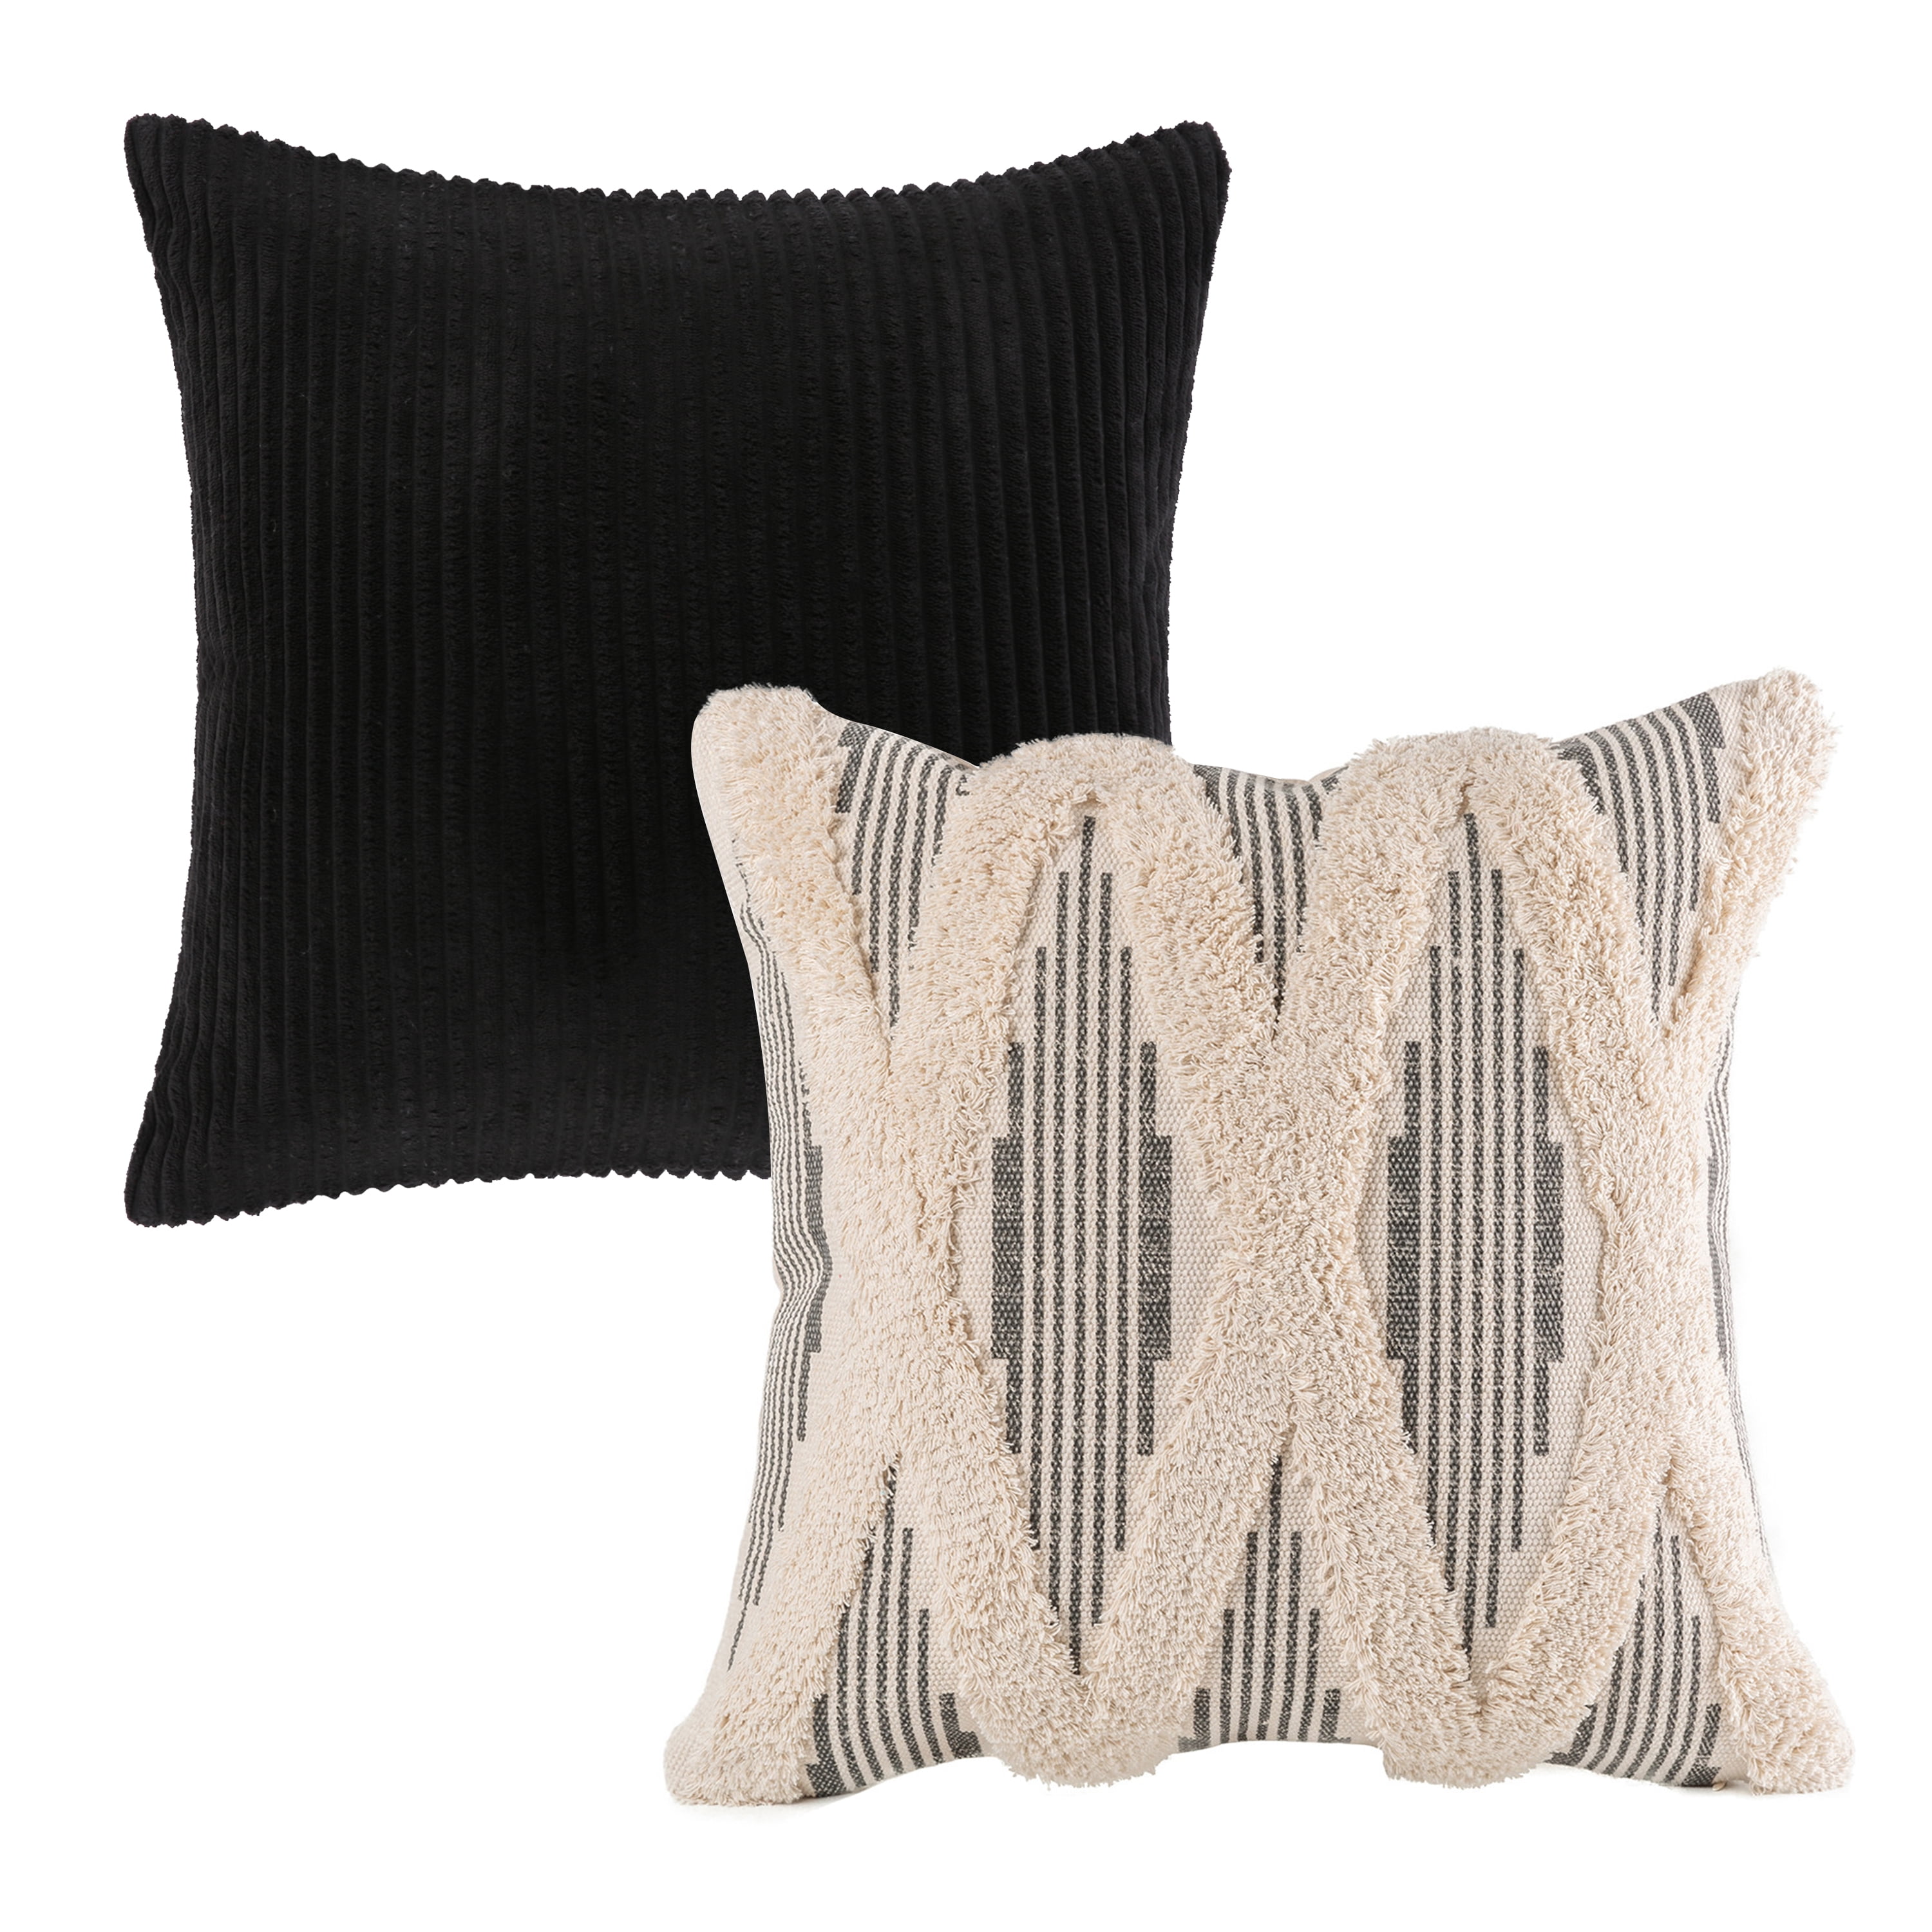 Decorative Throw Pillows Set of 4, Soft Corduroy Striped Velvet & Boho Woven Tufted Series Cushion Bundles, for Sofa Couch Bedroom, Black & Beige with